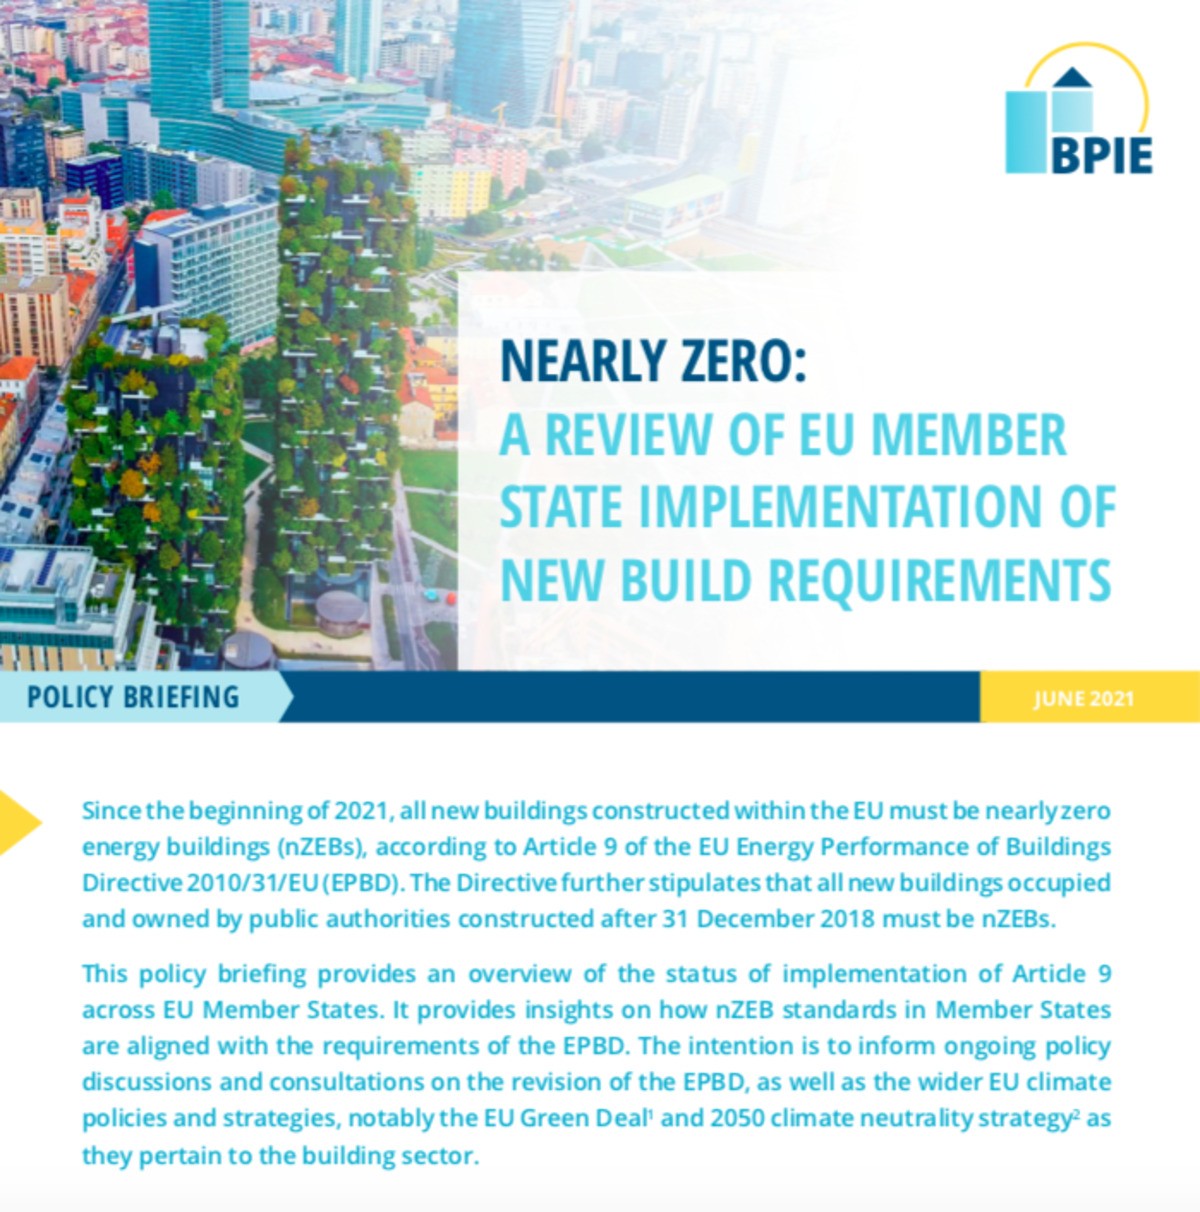 Nearly Zero: A review of EU Member State implementation of new build requirements